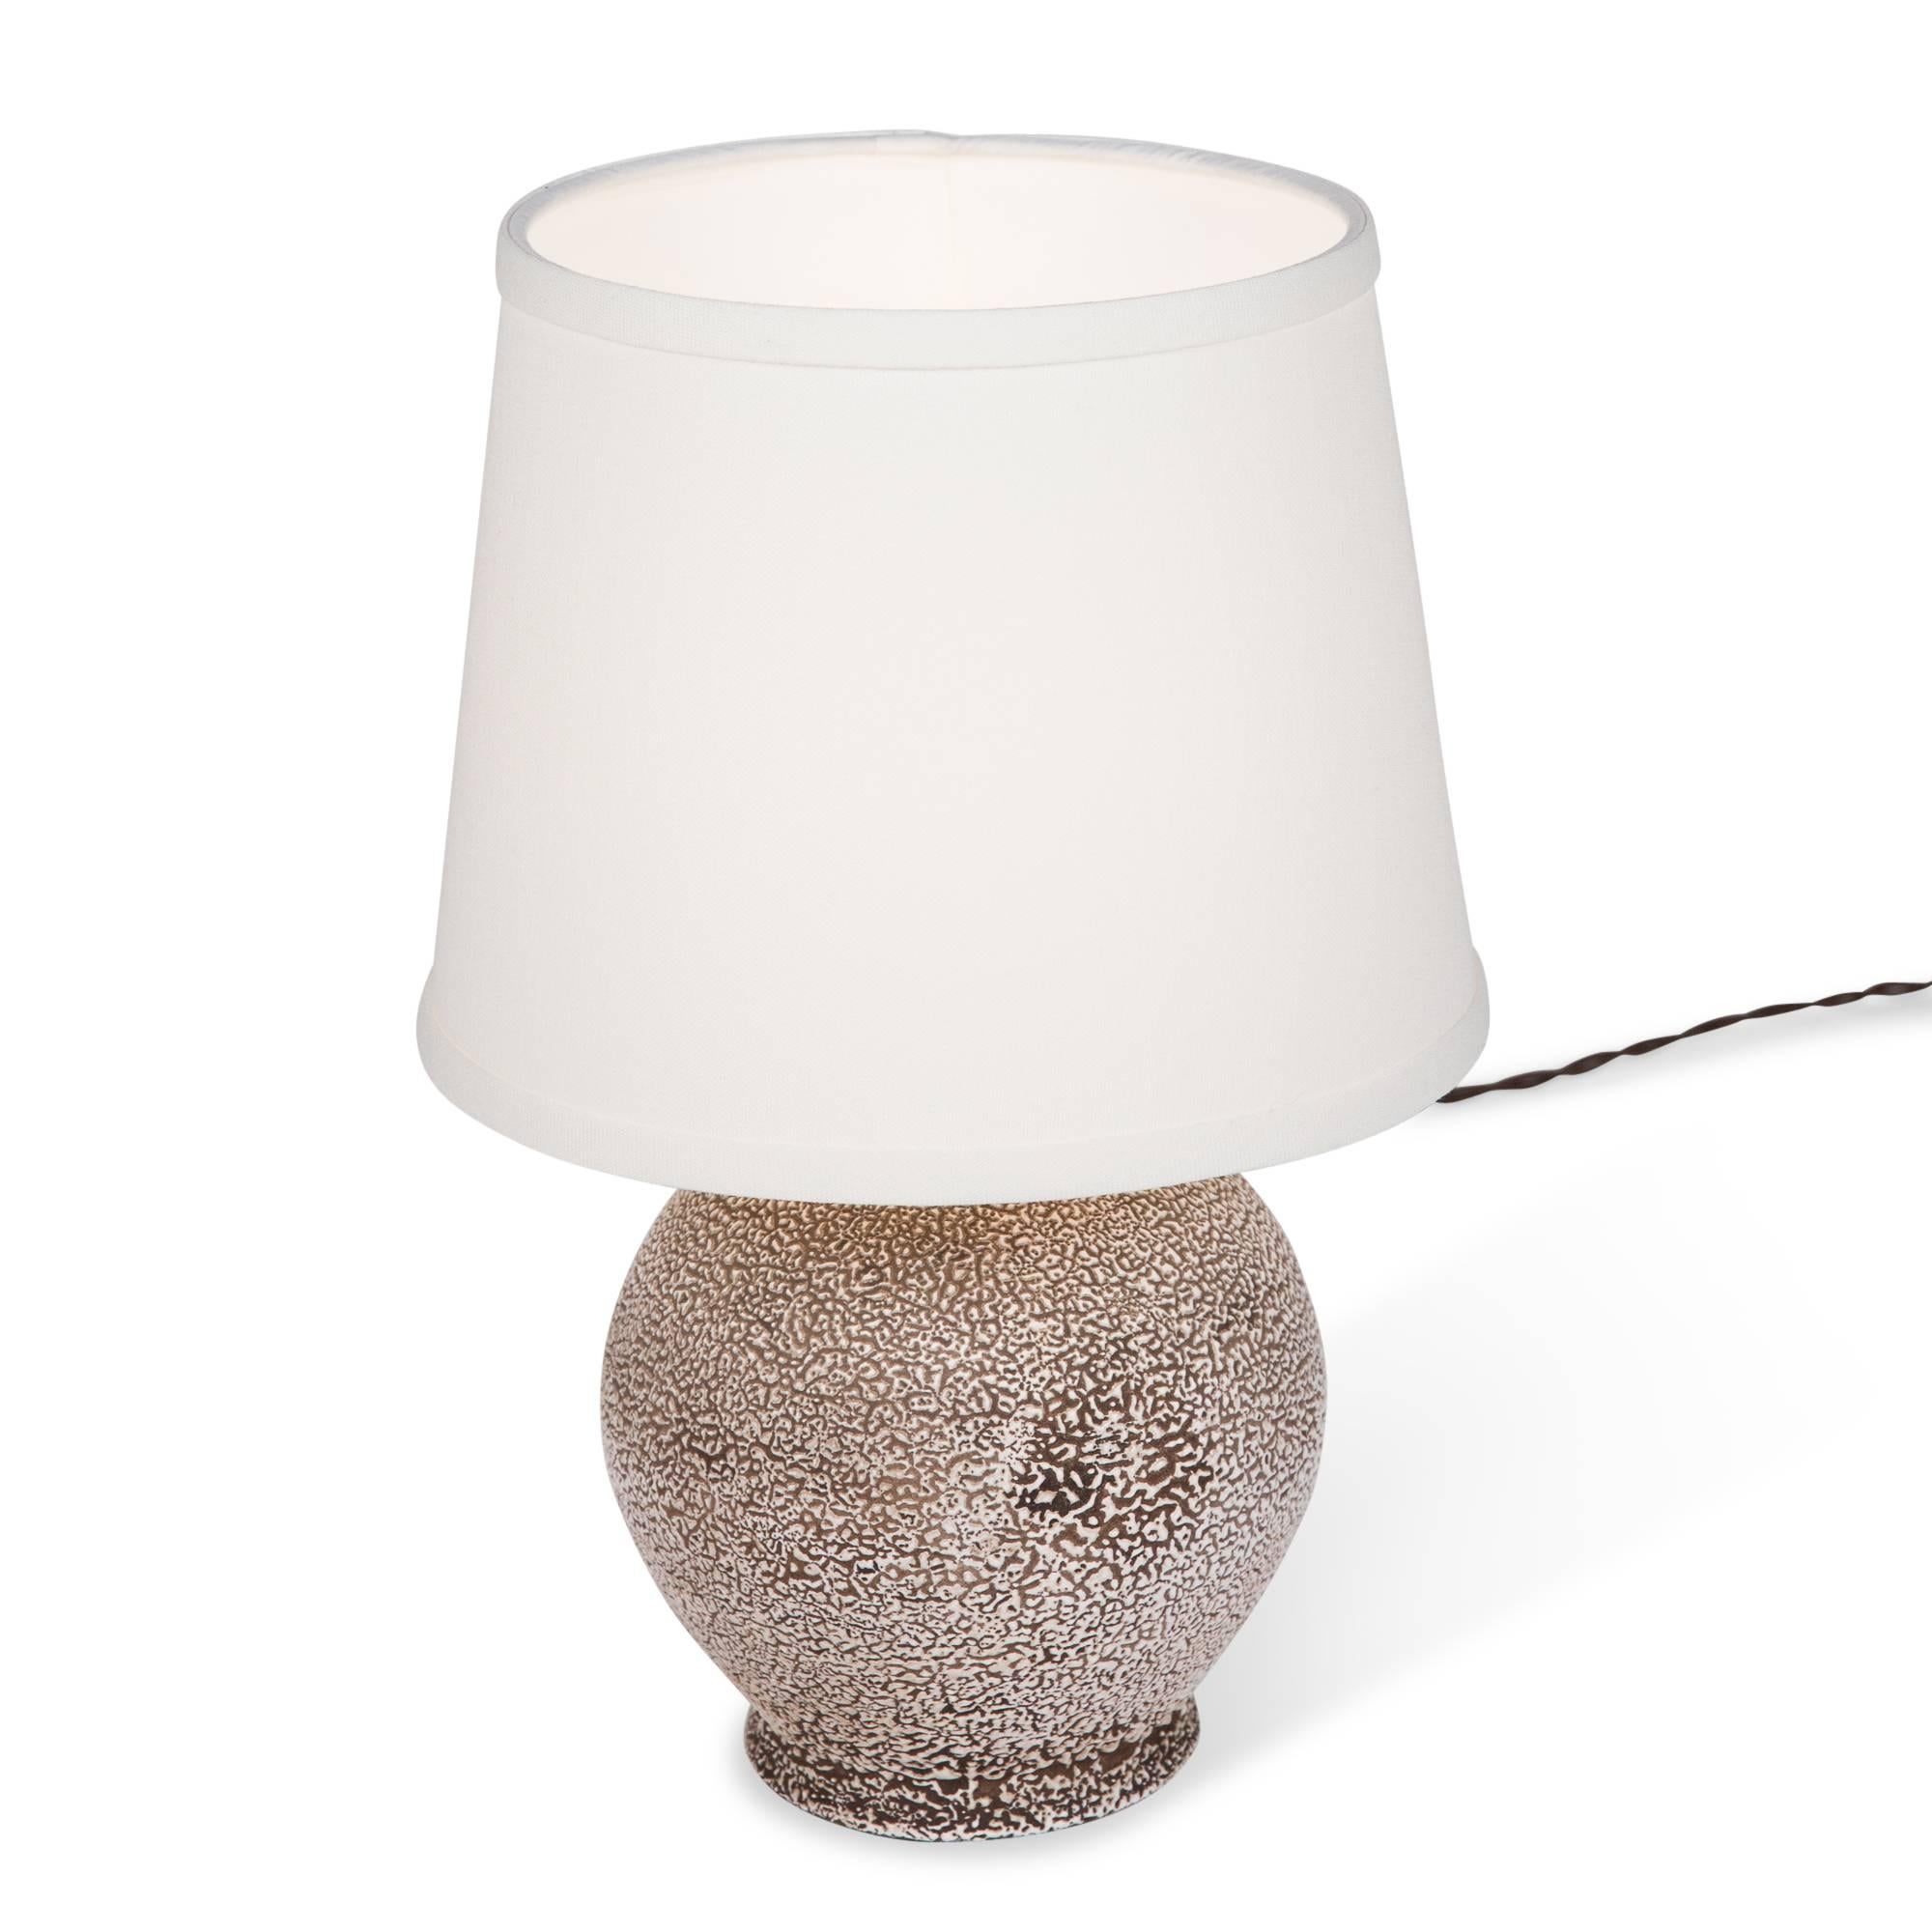 Lightly spotted ceramic table lamp, of spherical form by Louis Dage, France, 1930s. Overall height 14 1/2 in, diameter of base 5 1/2 in. Shade measures top diameter 7 in, bottom dia 9 in, height 7 in.